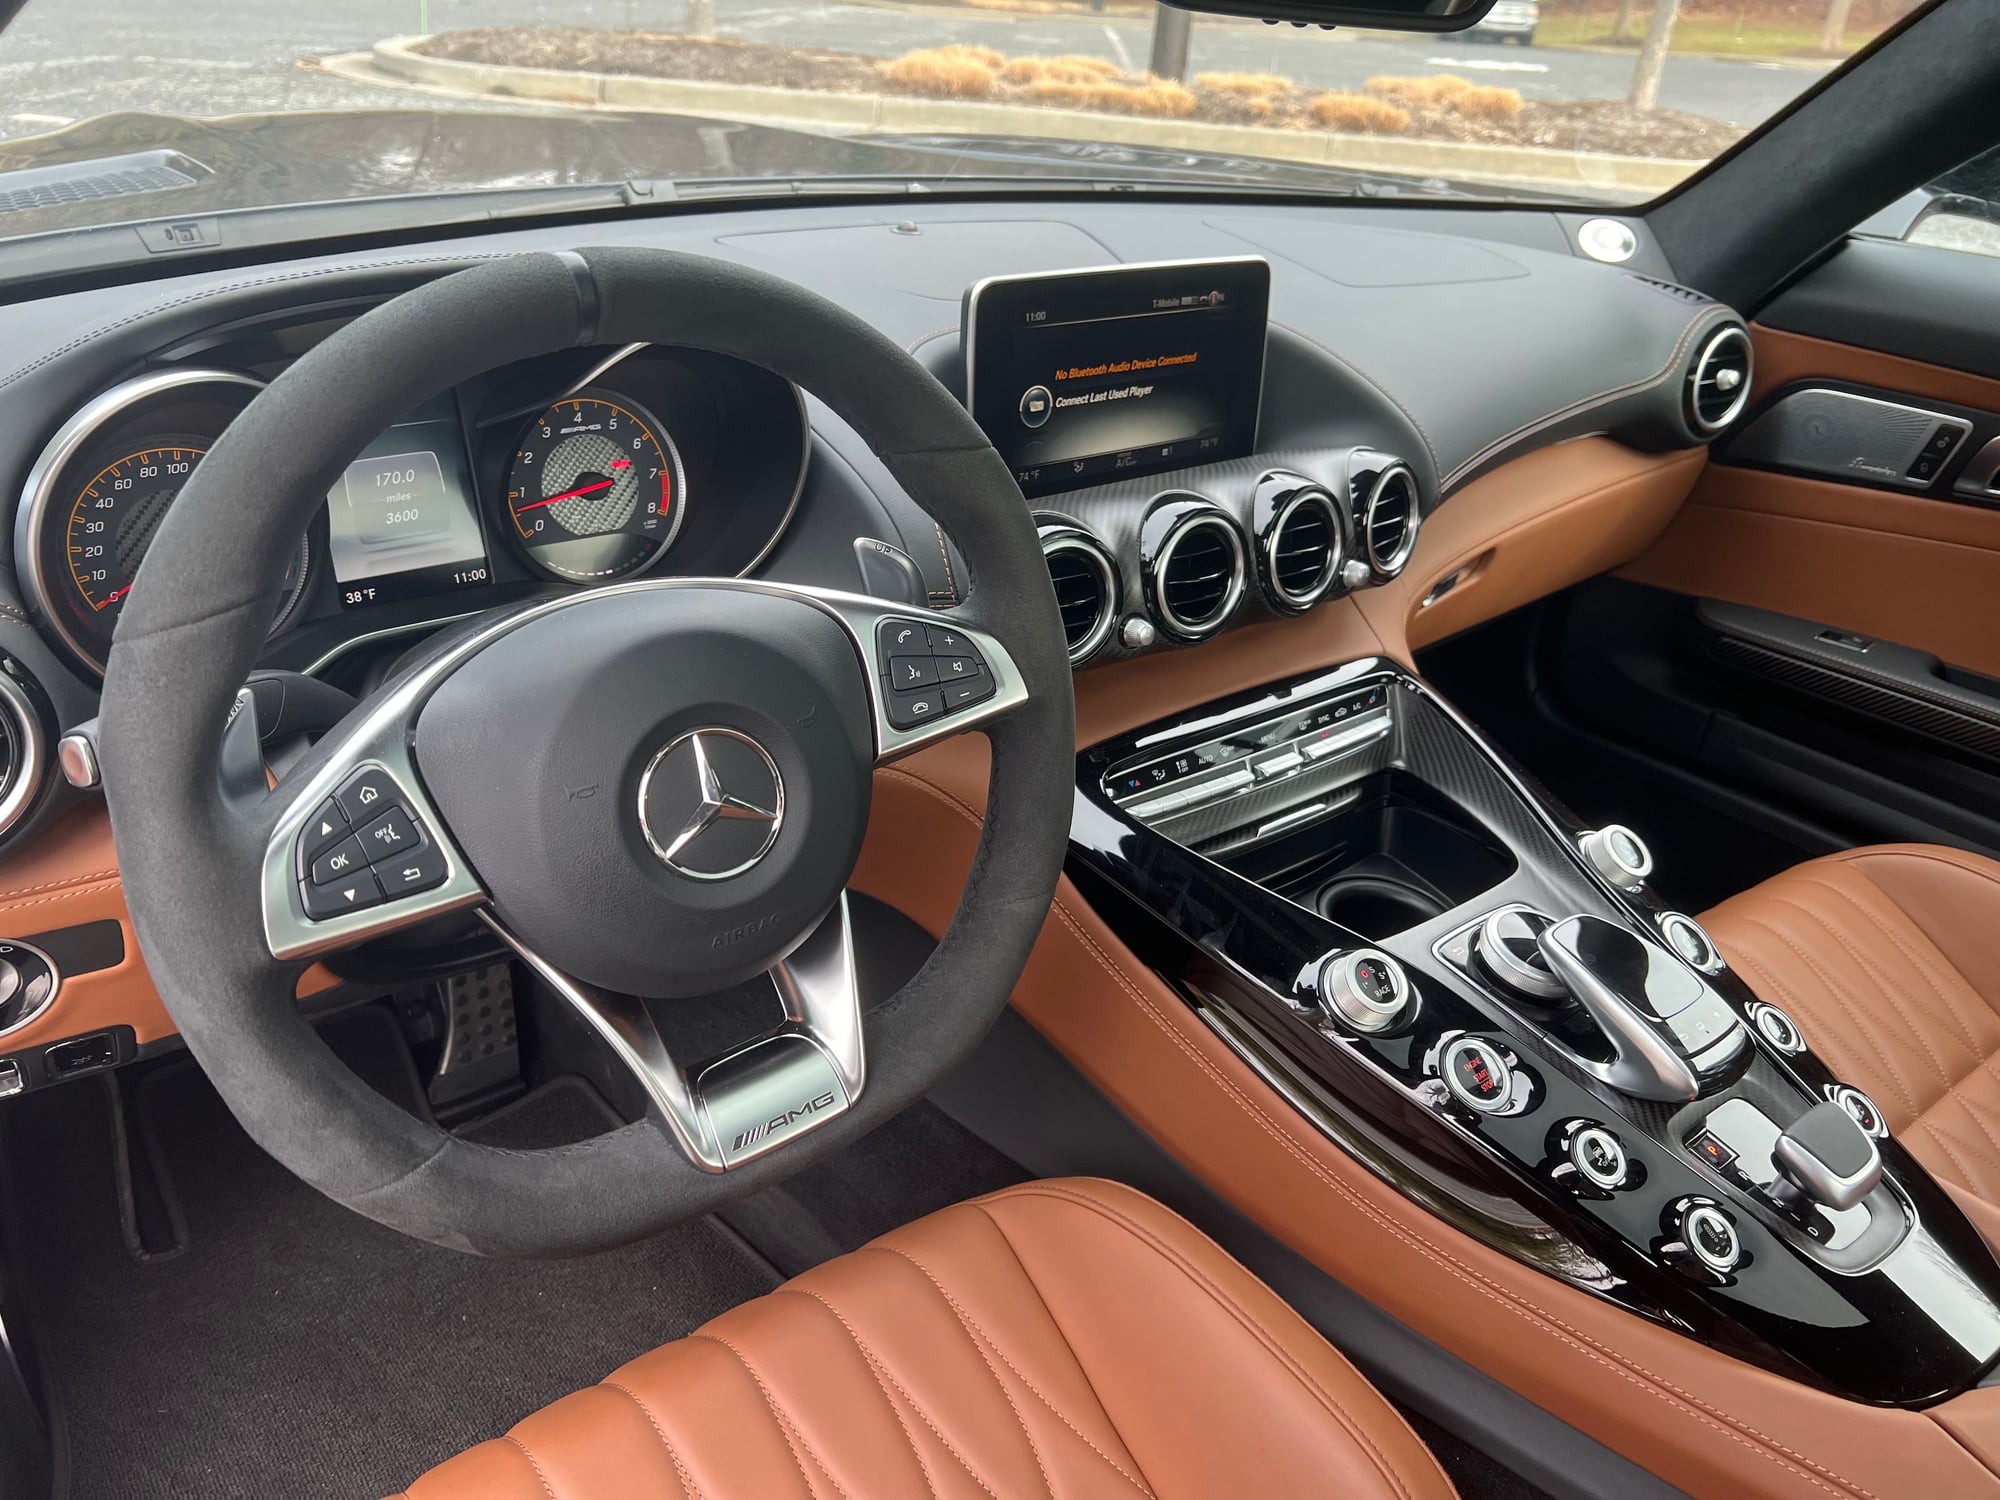 2016 Mercedes-Benz AMG GT S - Show room condition 2016 AMG GTS/ Nice Spec - Used - VIN WDDYJ7JA5GA008640 - 3,600 Miles - 8 cyl - Automatic - Coupe - Black - Lutherville Timonium, MD 21093, United States